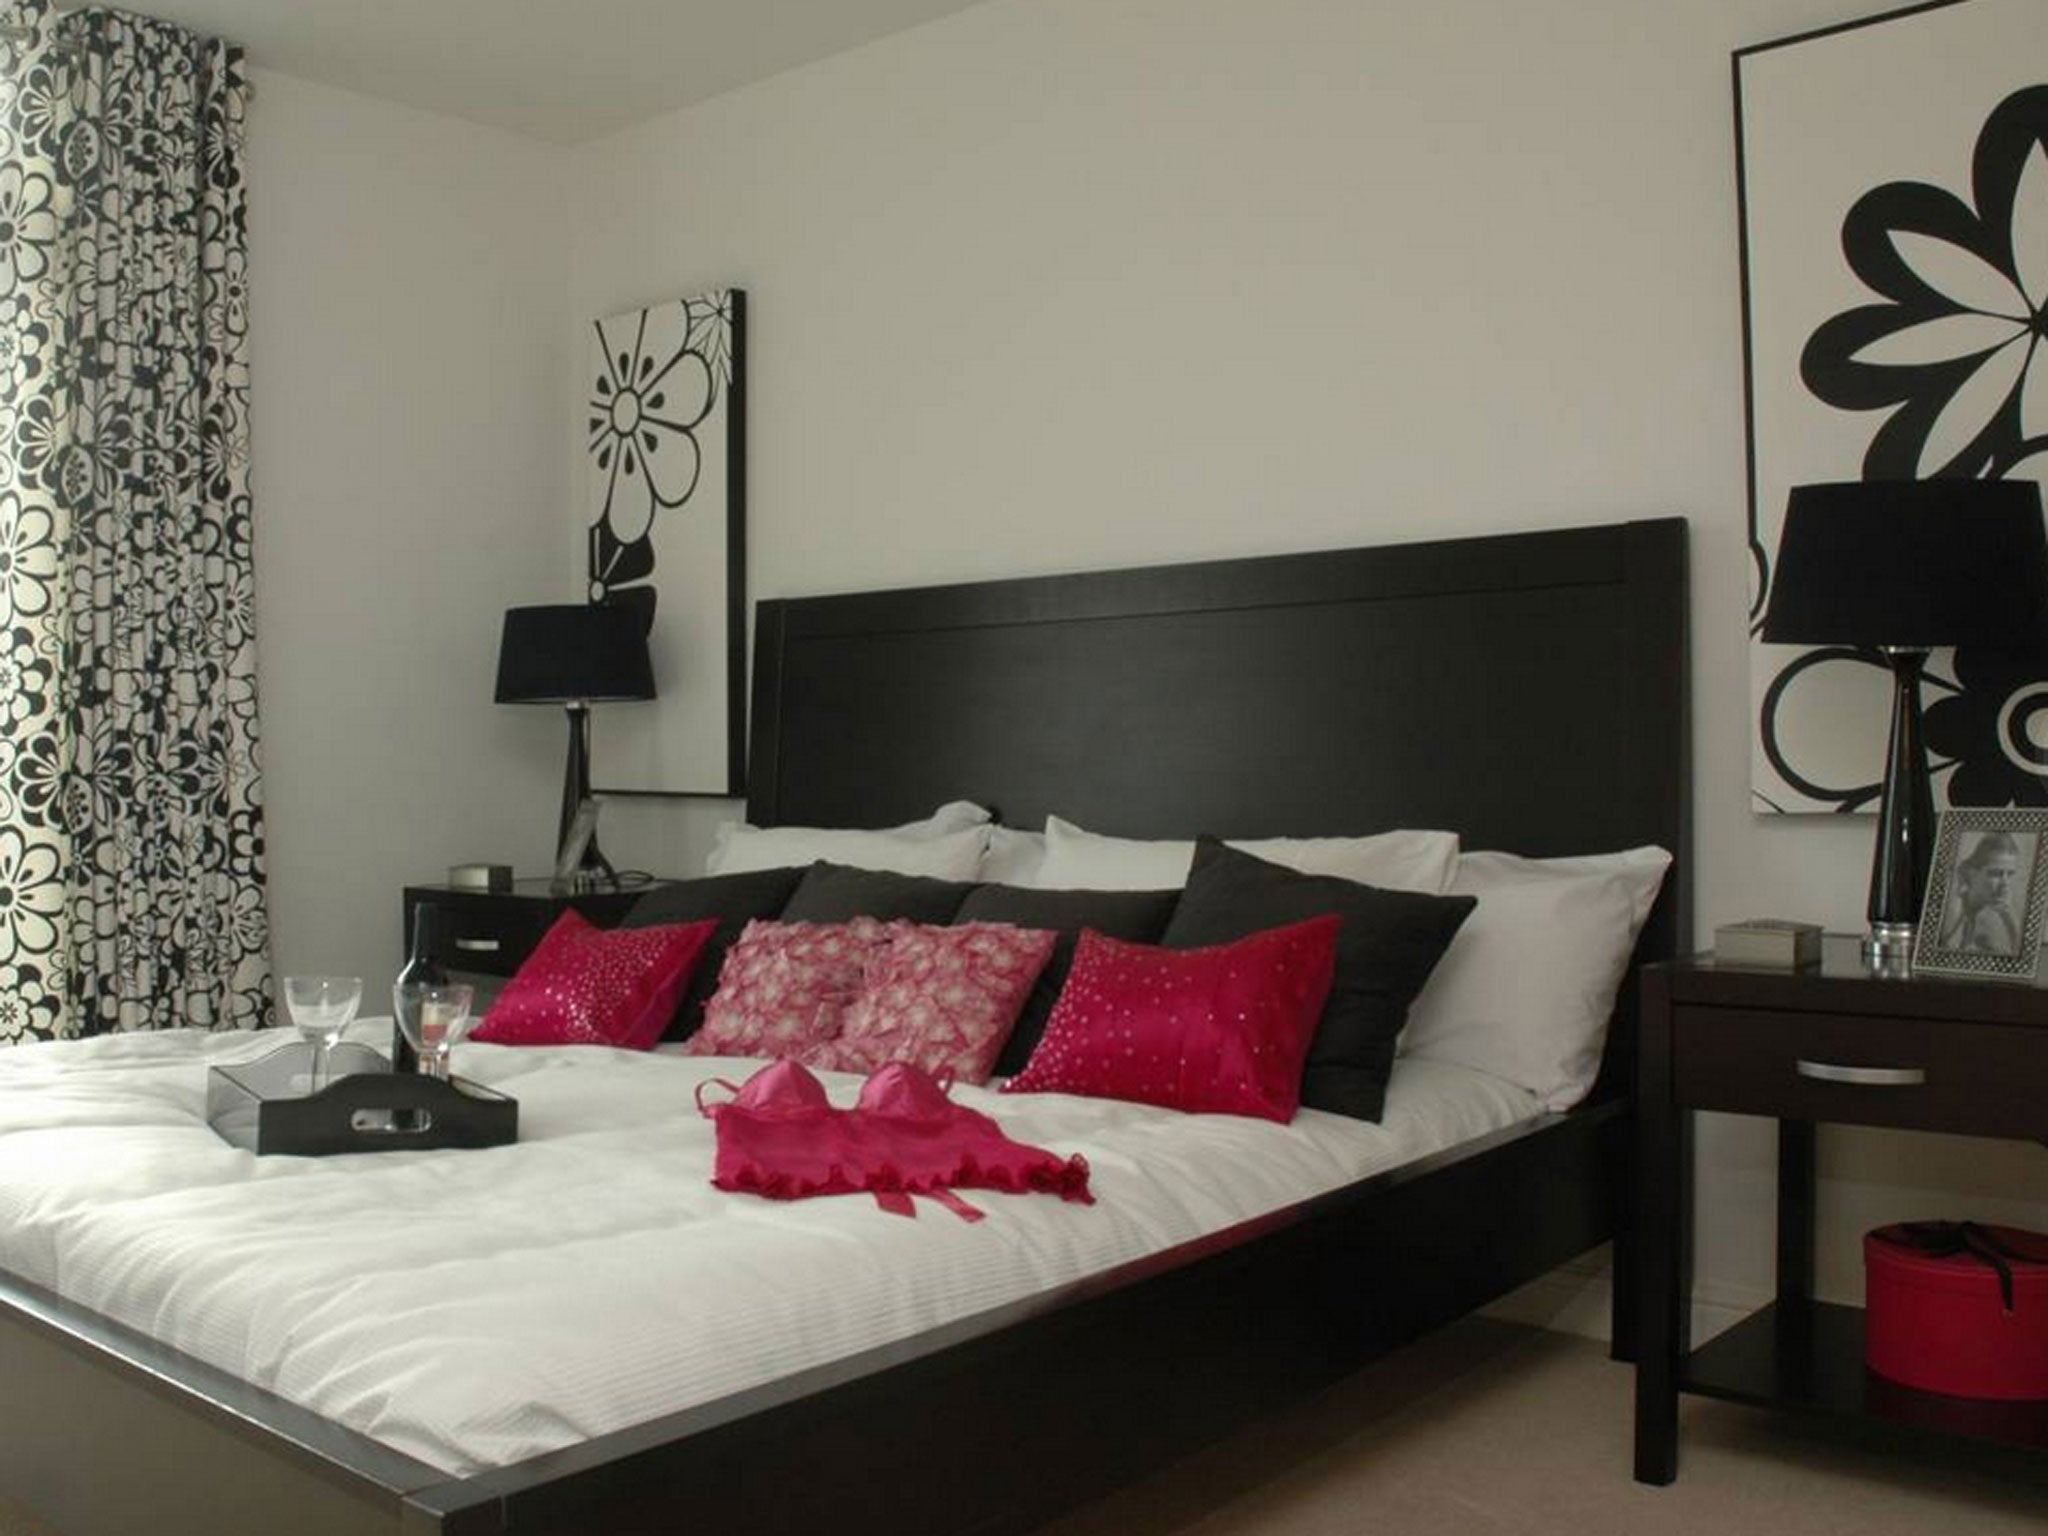 An enterprising vendor in east London has given their bedroom a boudoir feel by leaving a racy fuchsia negligee, complete with bottle of red and two glasses on the bed for the estate agent’s snapper to capture